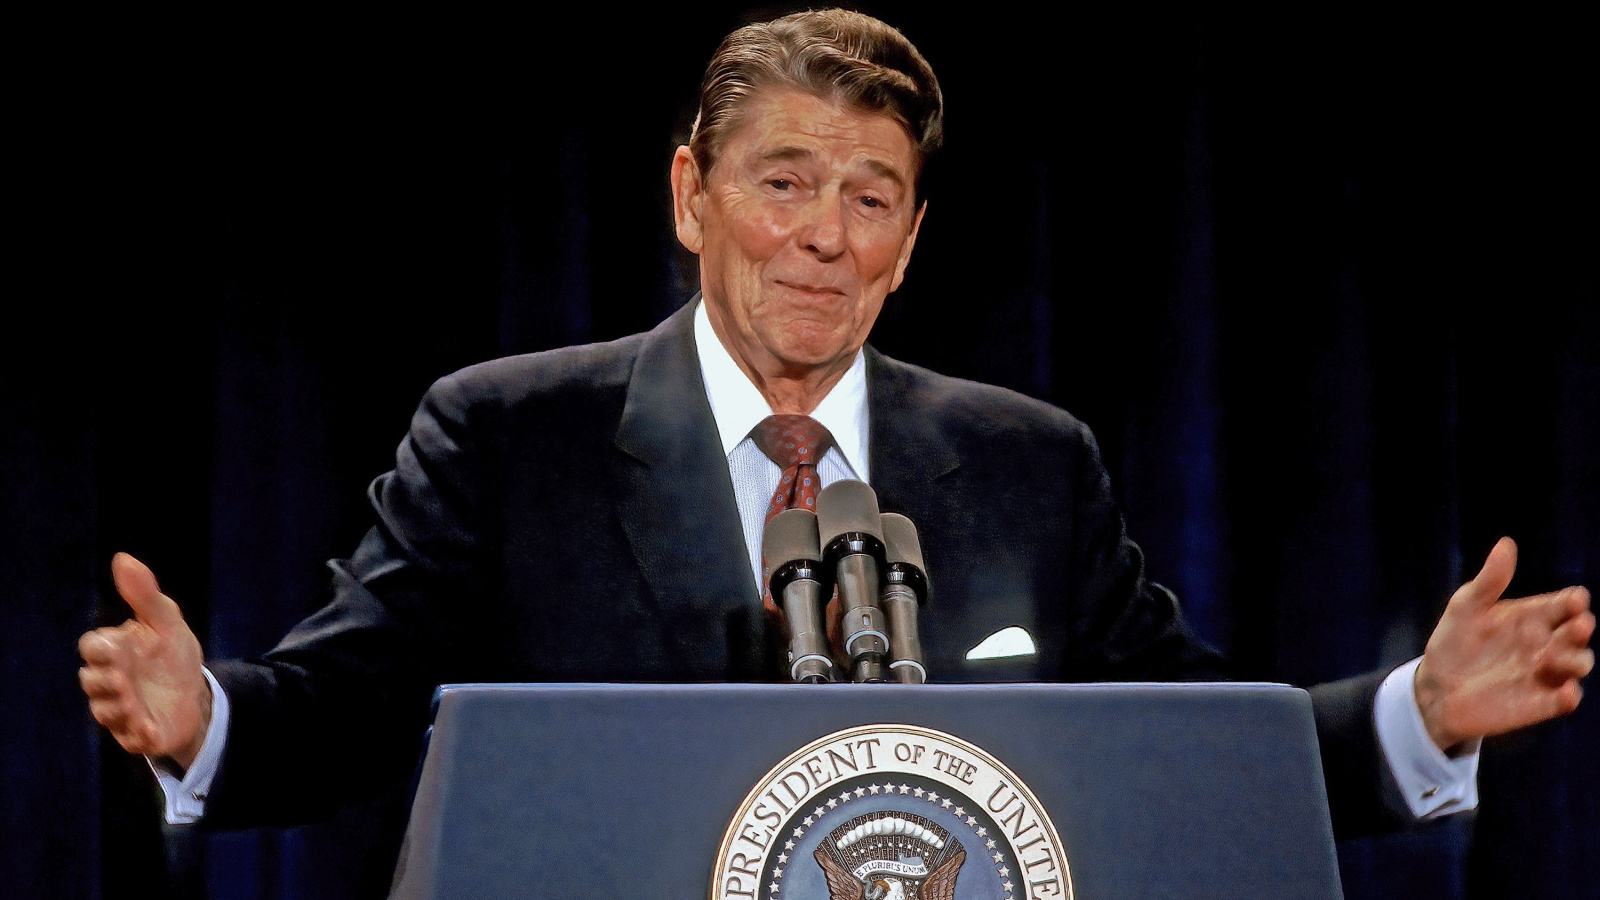 image credit: mark-reinstein/Shutterstock <p>Ronald Reagan’s 1980 presidential campaign featured a unique vow: staying awake. While most politicians pledge to improve the economy or healthcare, Reagan humorously promised to remain alert. This pledge stemmed from concerns about his age—69 at the time—and his ability to lead the nation energetically. During a debate, Reagan quipped about not exploiting his opponent’s “youth and inexperience,” a remark that not only defused the age issue but also displayed his charm. Remarkably, Reagan lived up to his promise, staying wakeful and engaged throughout his two terms.</p>